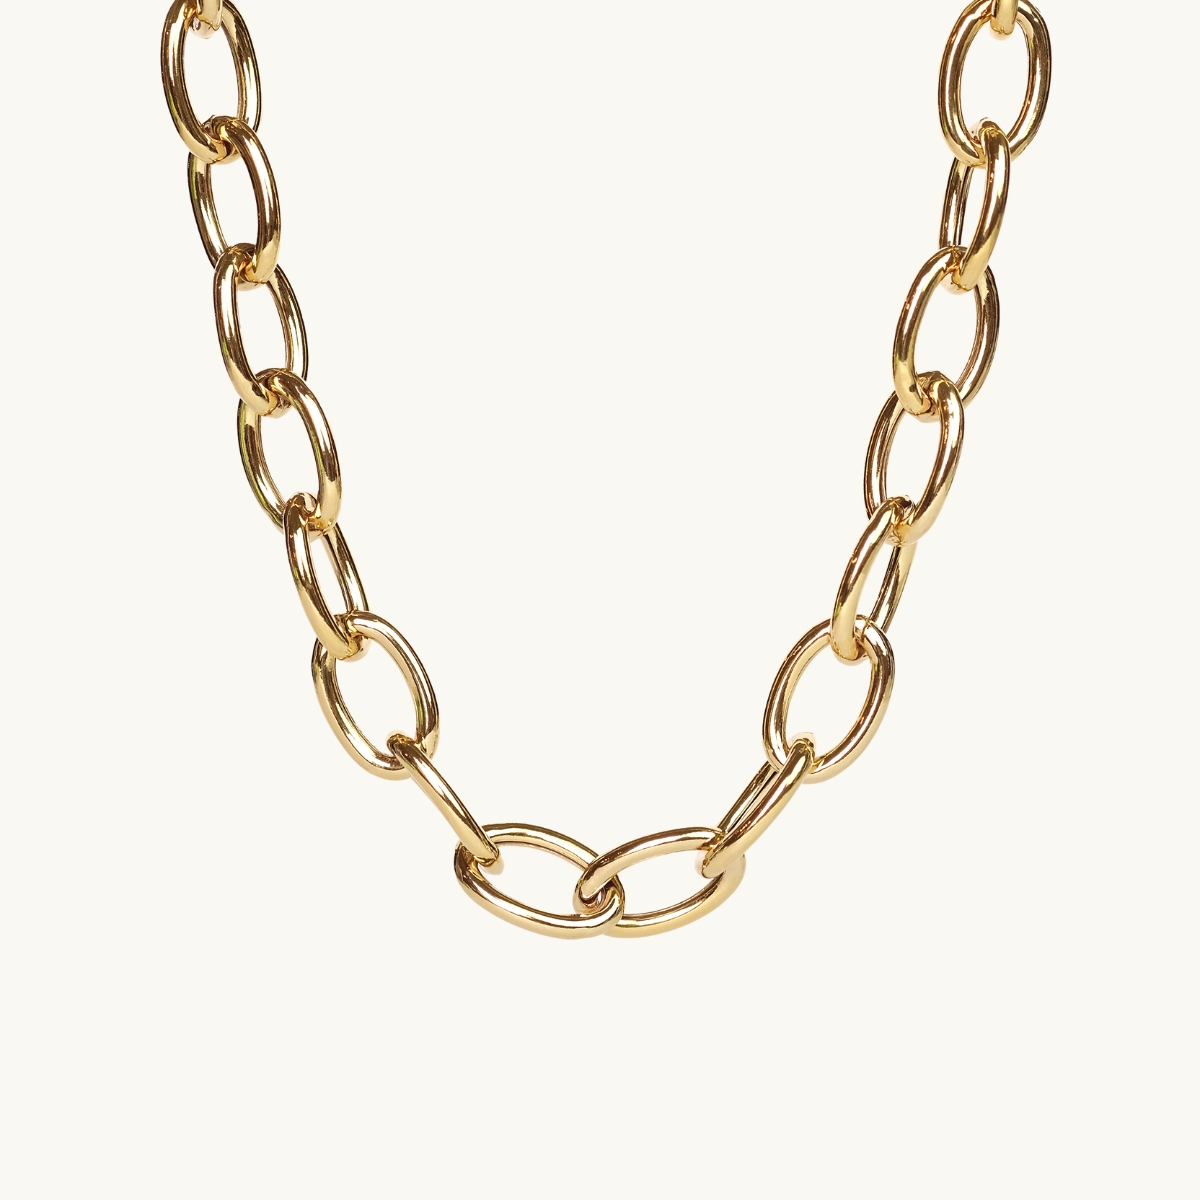 Chunky chain link necklace in gold